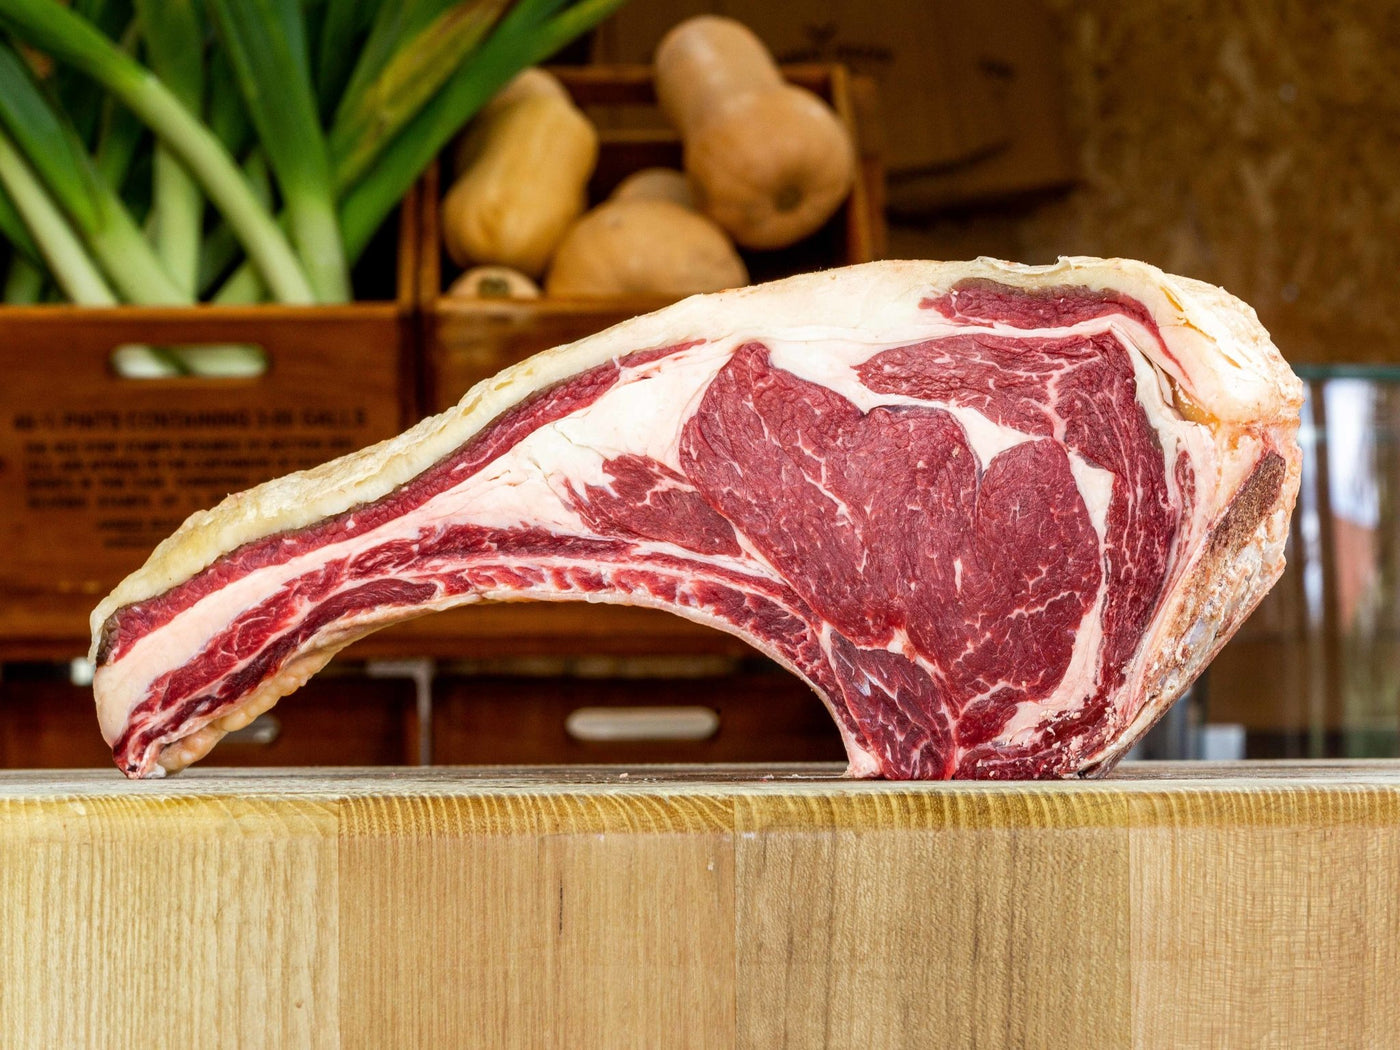 Grass Fed, Dry-Aged Toma-Chop - Beef - Thomas Joseph Butchery - Ethical Dry-Aged Meat The Best Steak UK Thomas Joseph Butchery